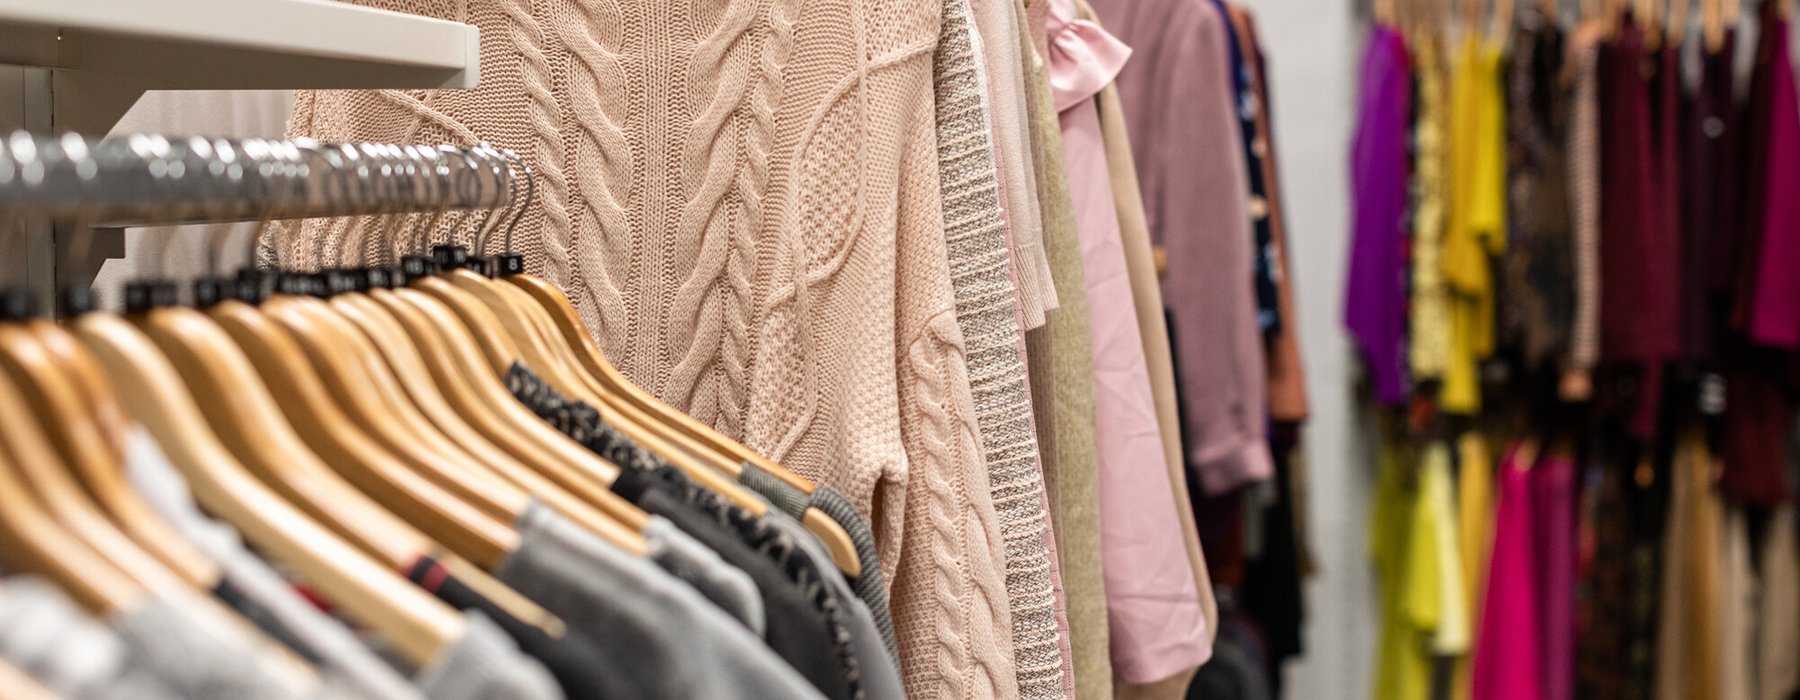 Pastel knitted jumpers hanging on racks in a large shop.